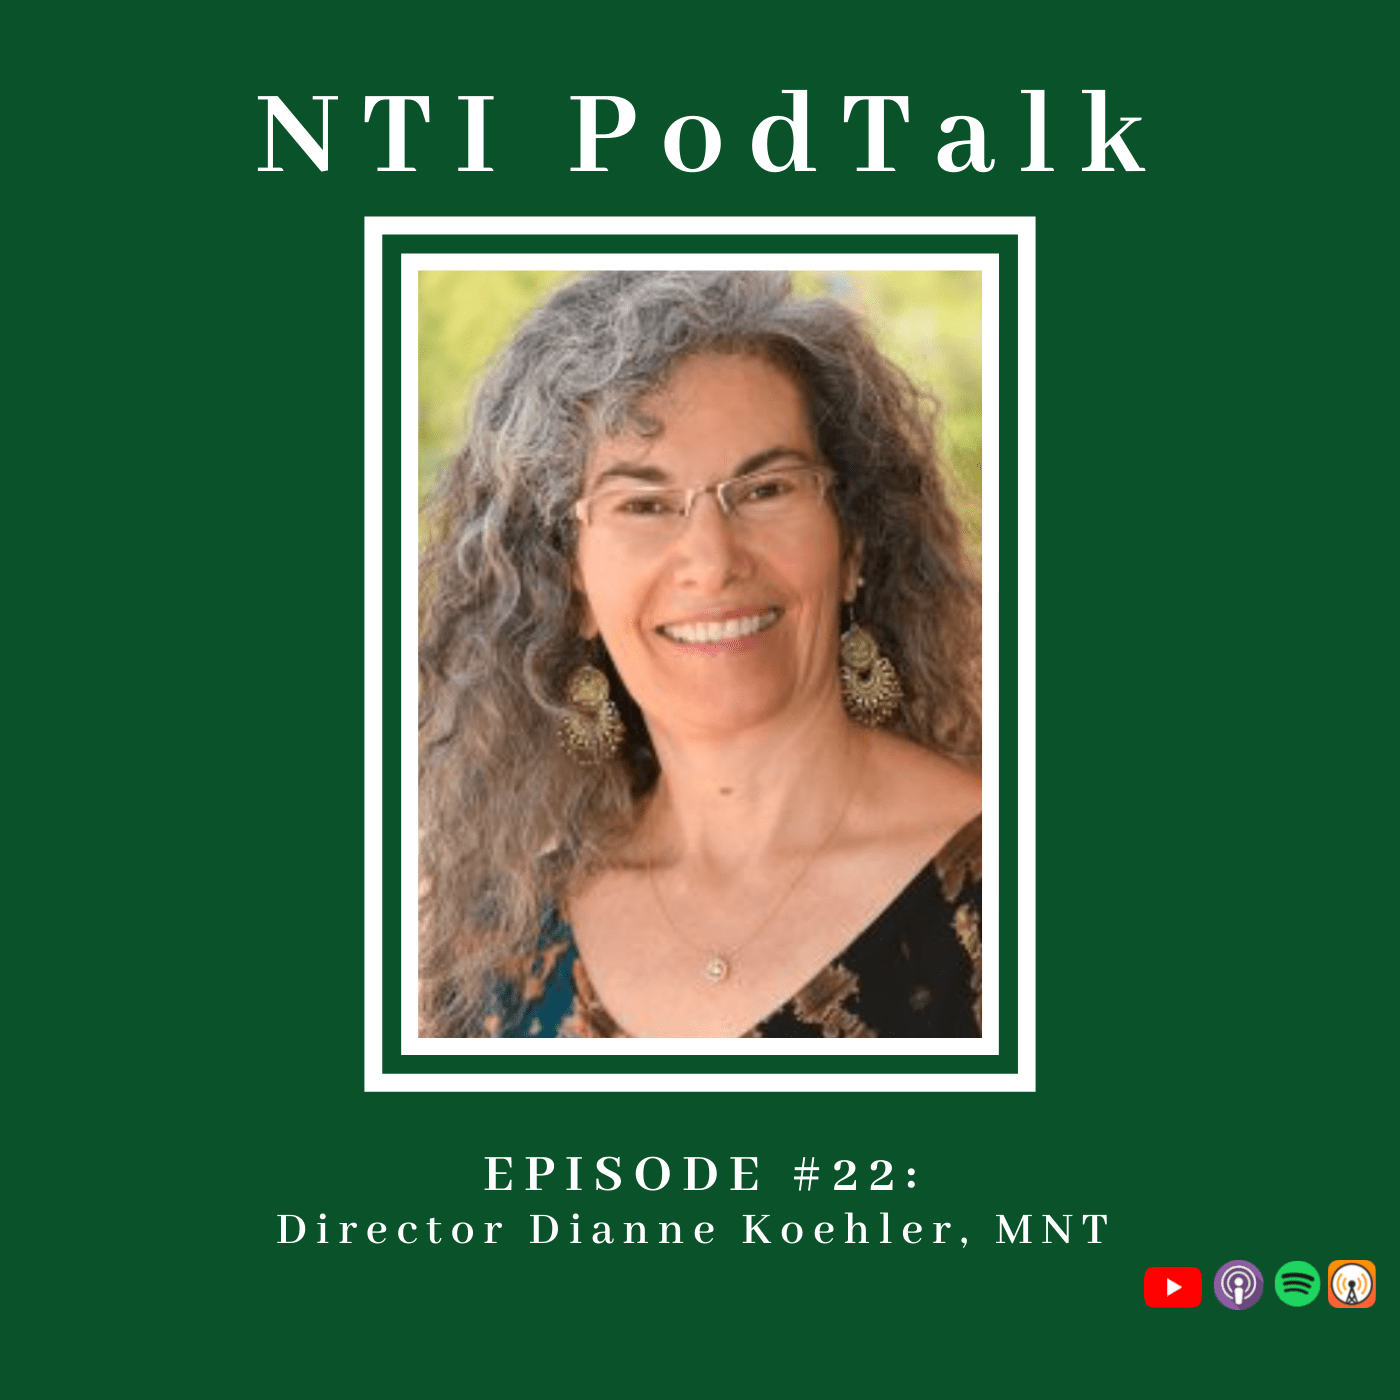 Featured image for “NTI PodTalk with Director, Dianne Koehler, MNT”